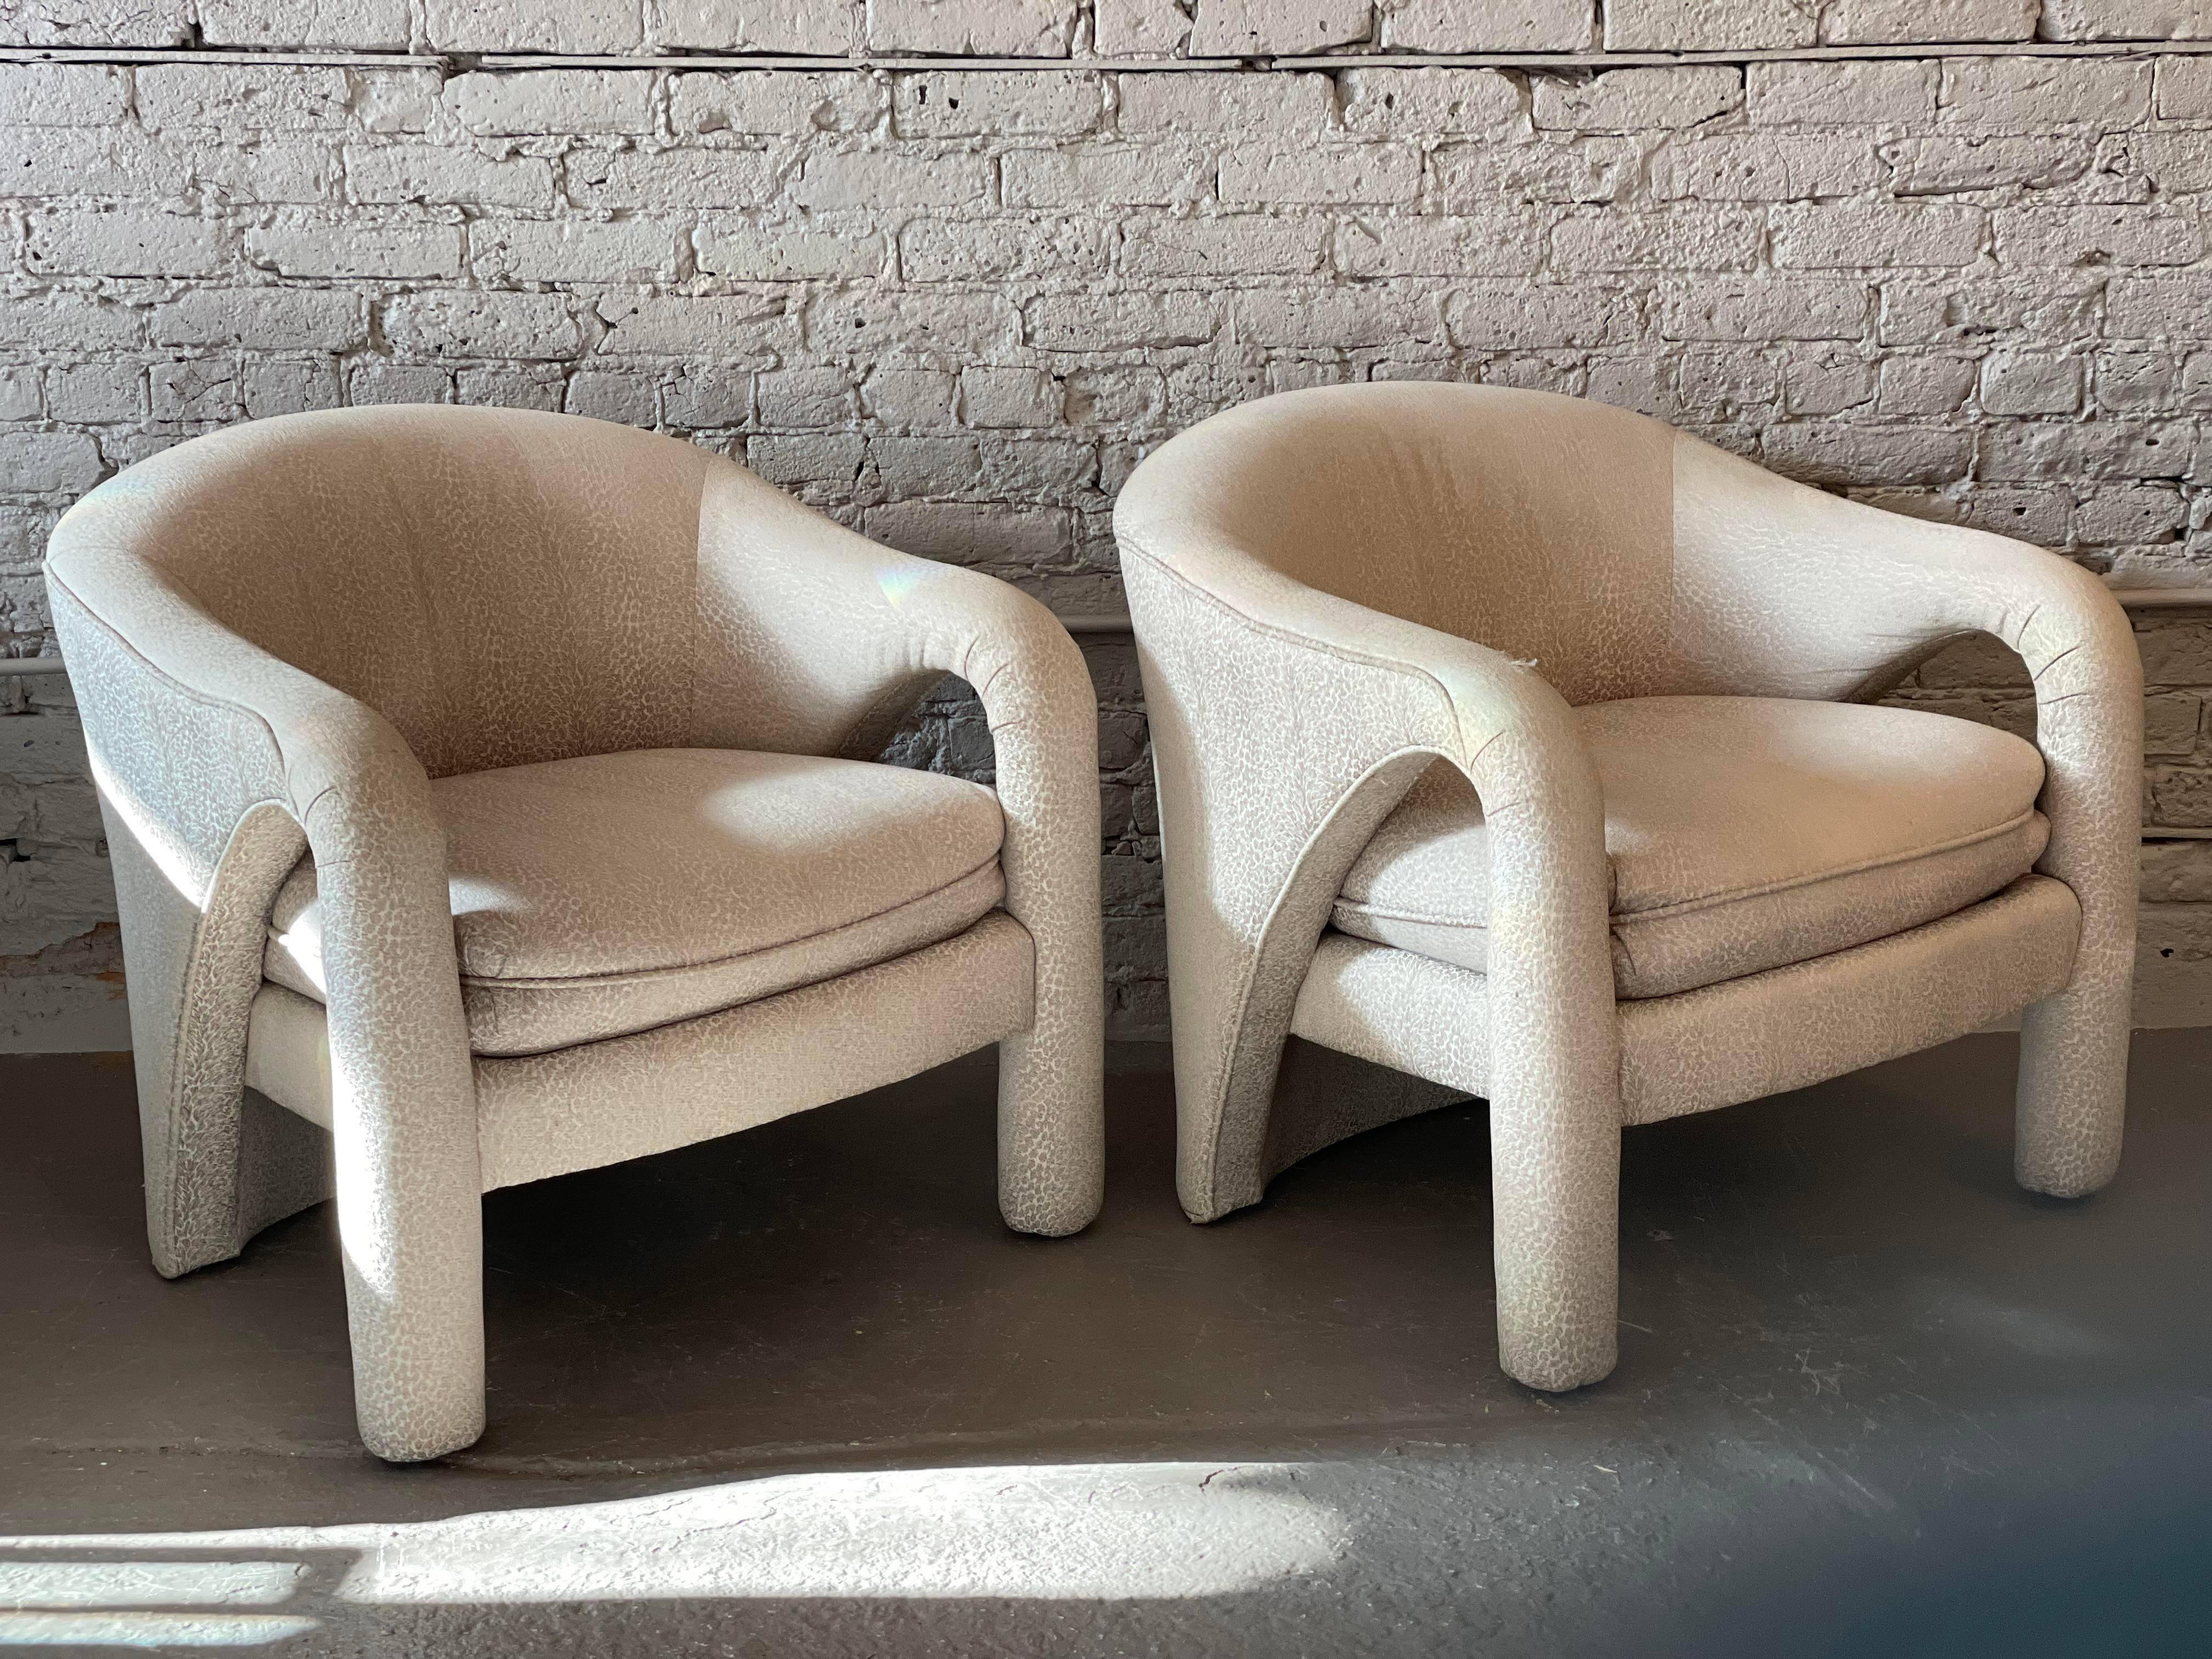 1980s Postmodern Sculptural Arc Chairs in Beige Upholstery, a Pair For Sale 1